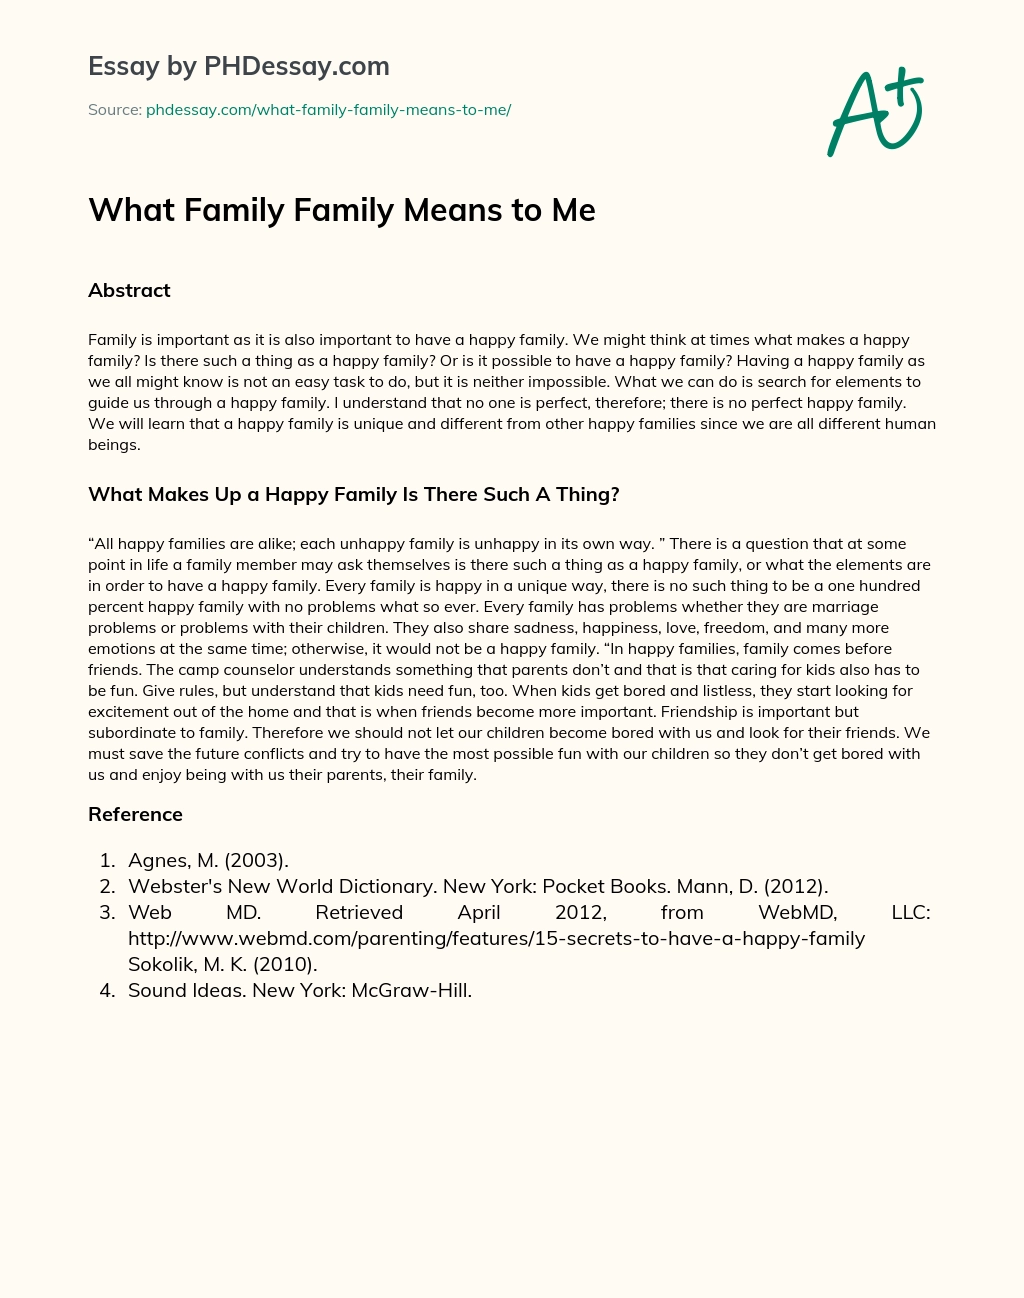 What Family Family Means to Me essay